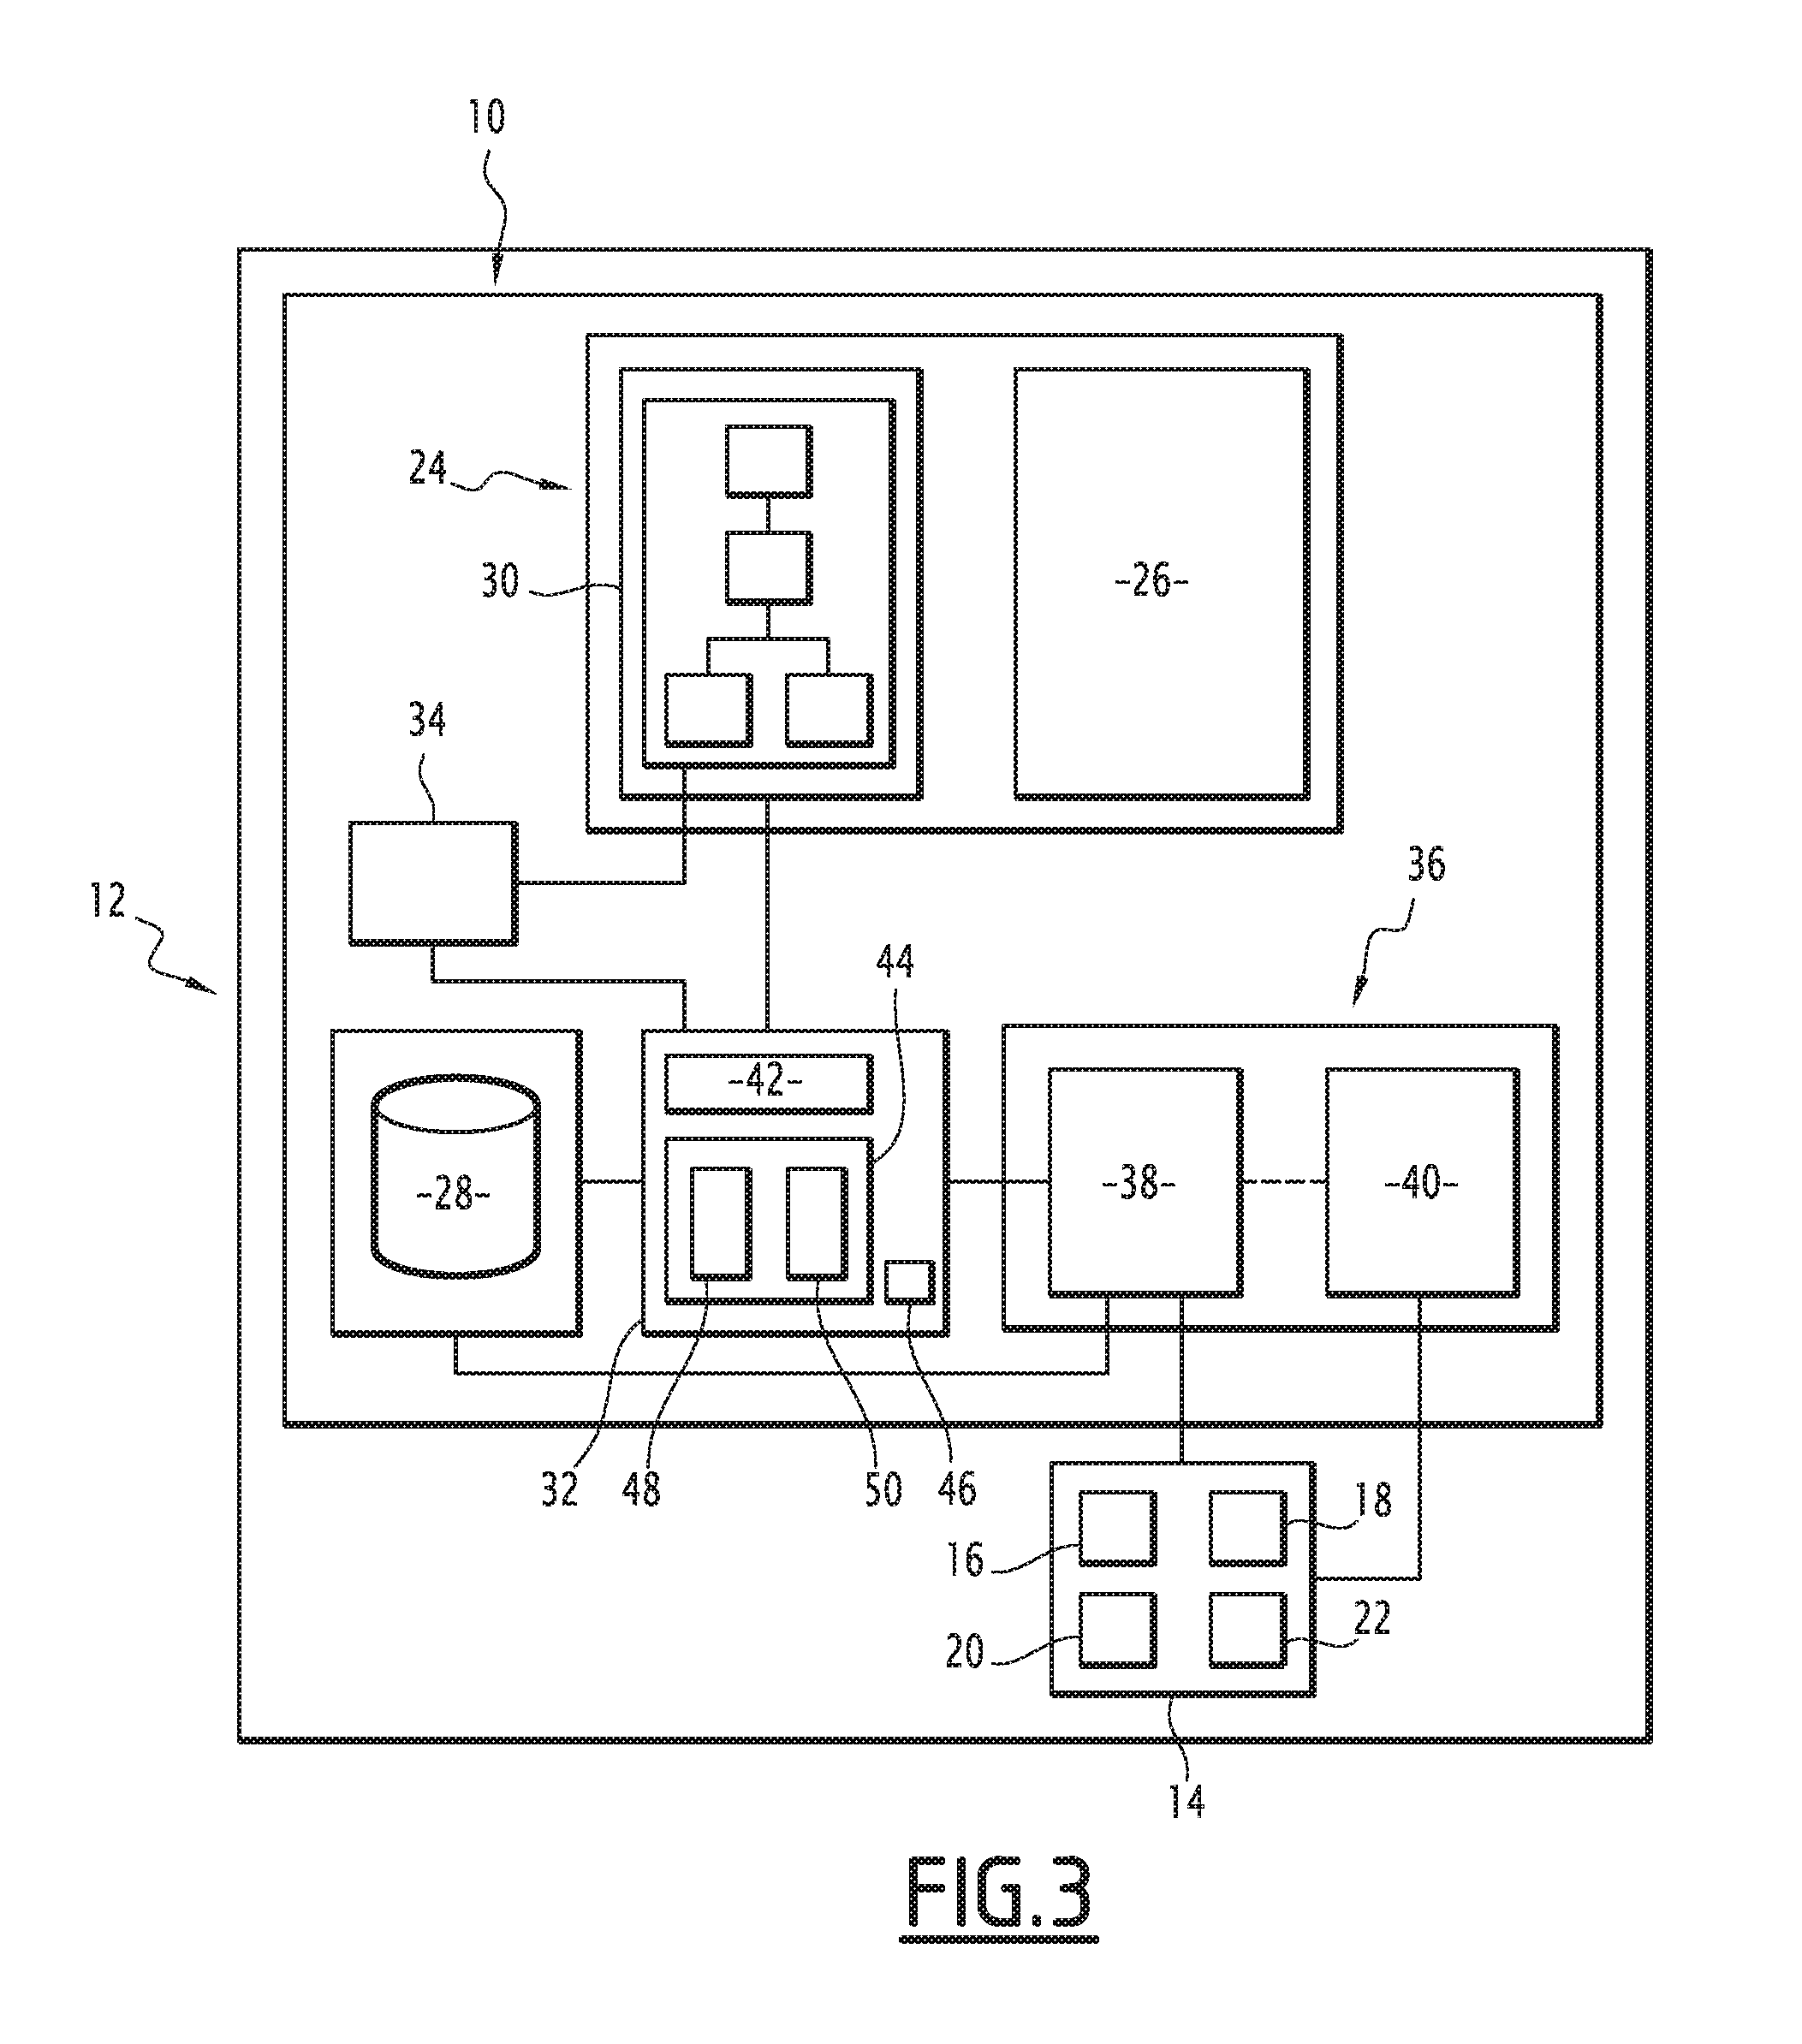 System for visualizing an aircraft procedure having several alternate sequences and related process